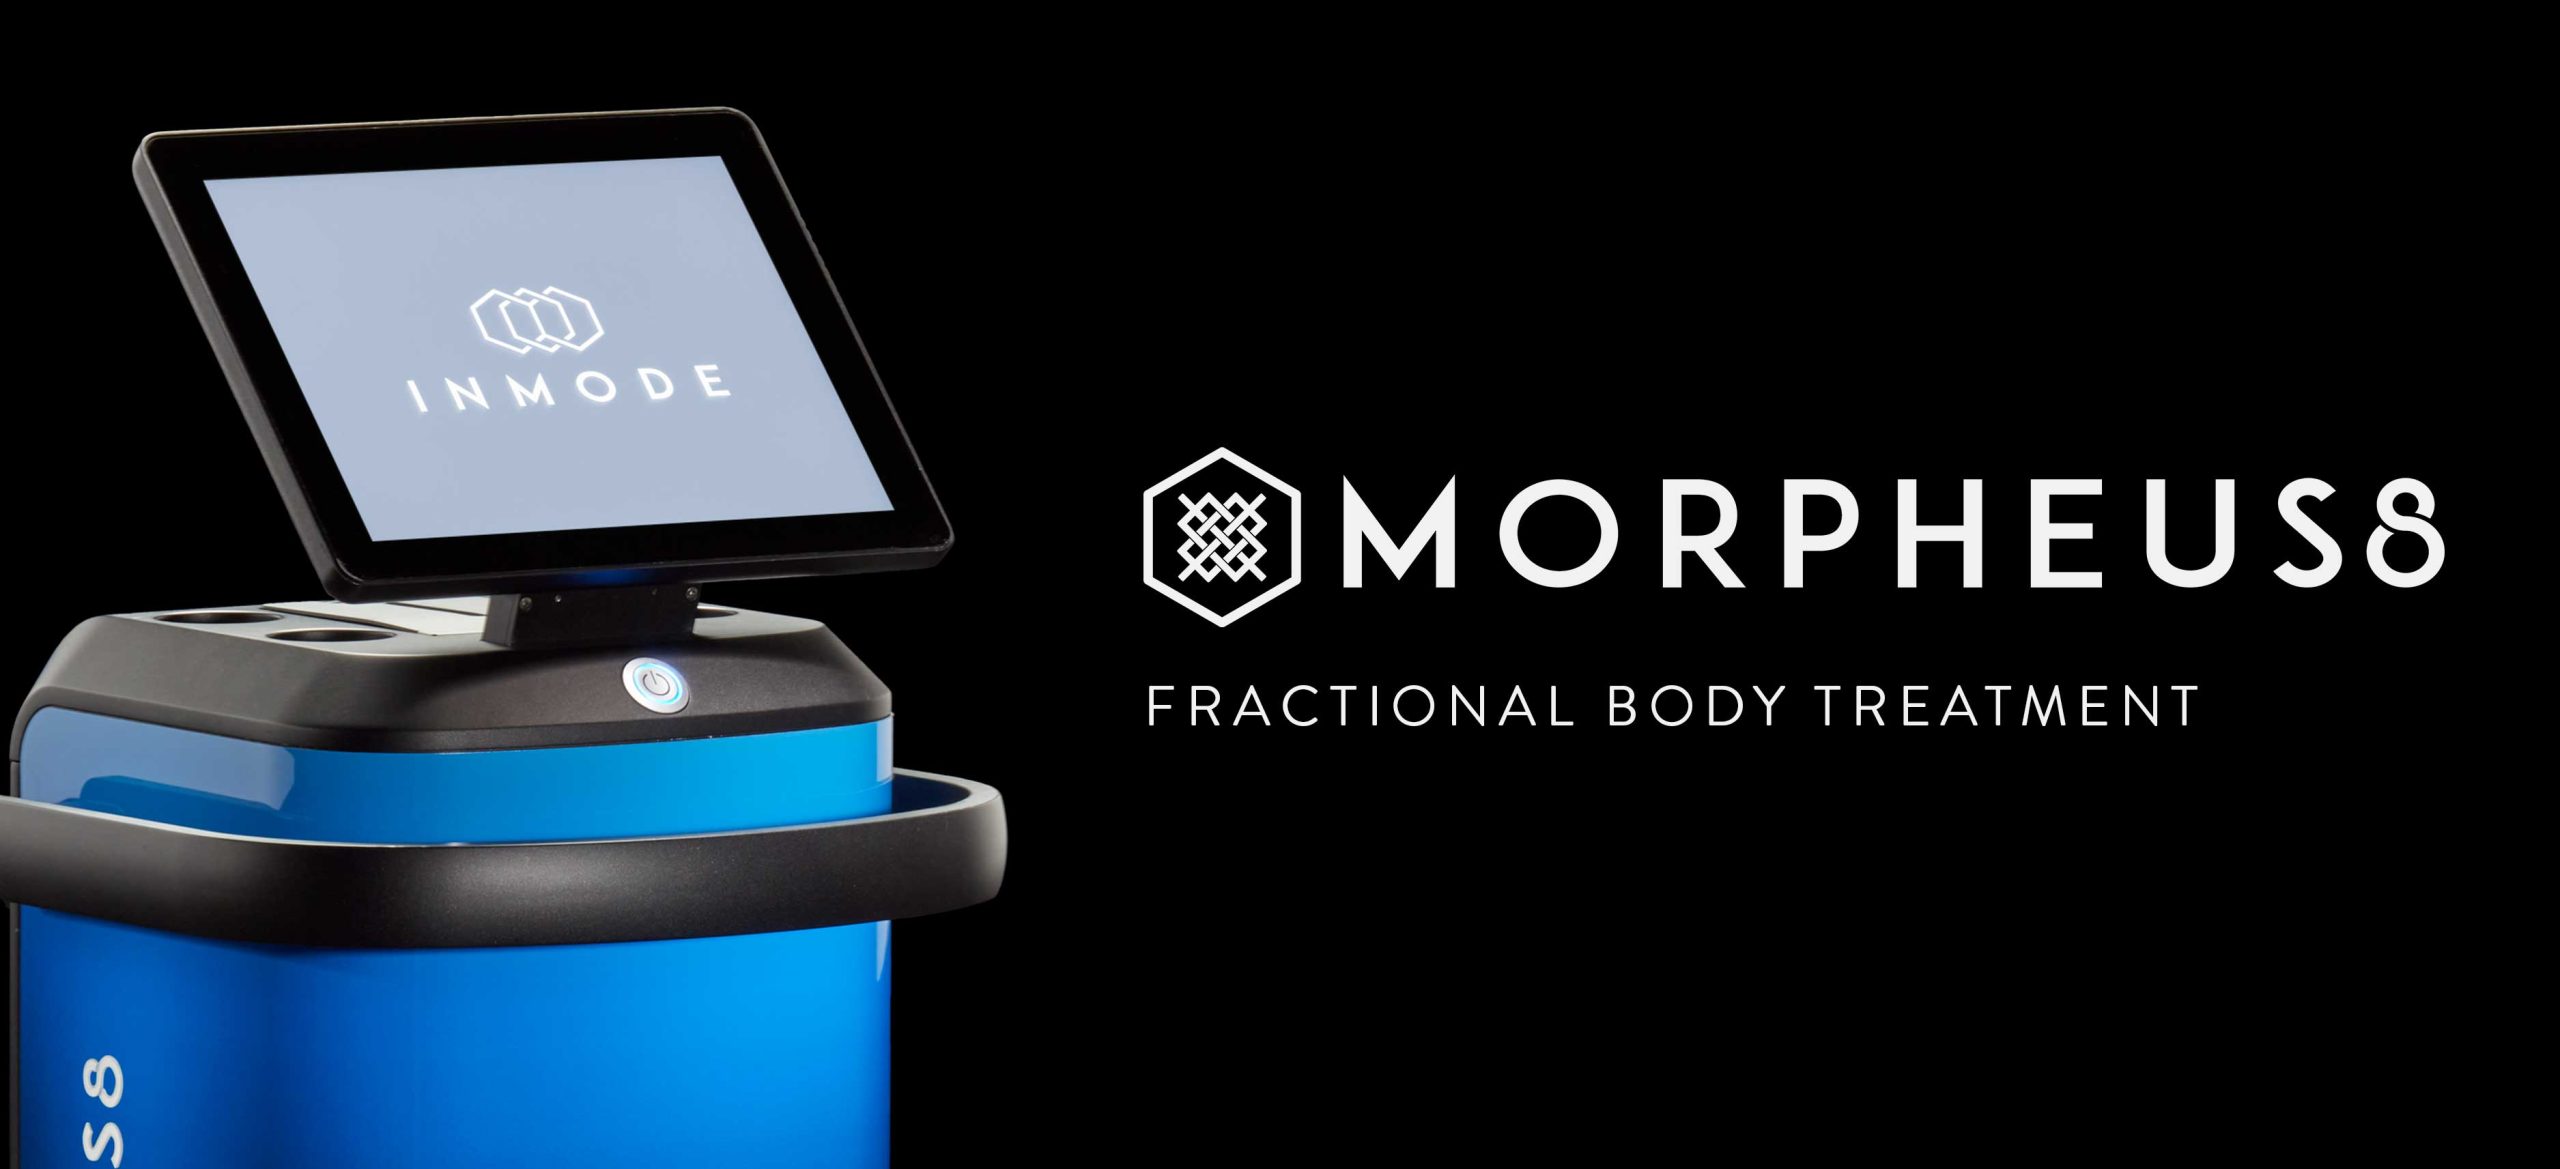 I Got Morpheus 8 To Refresh My Chest Skin: Here’s What I Learned